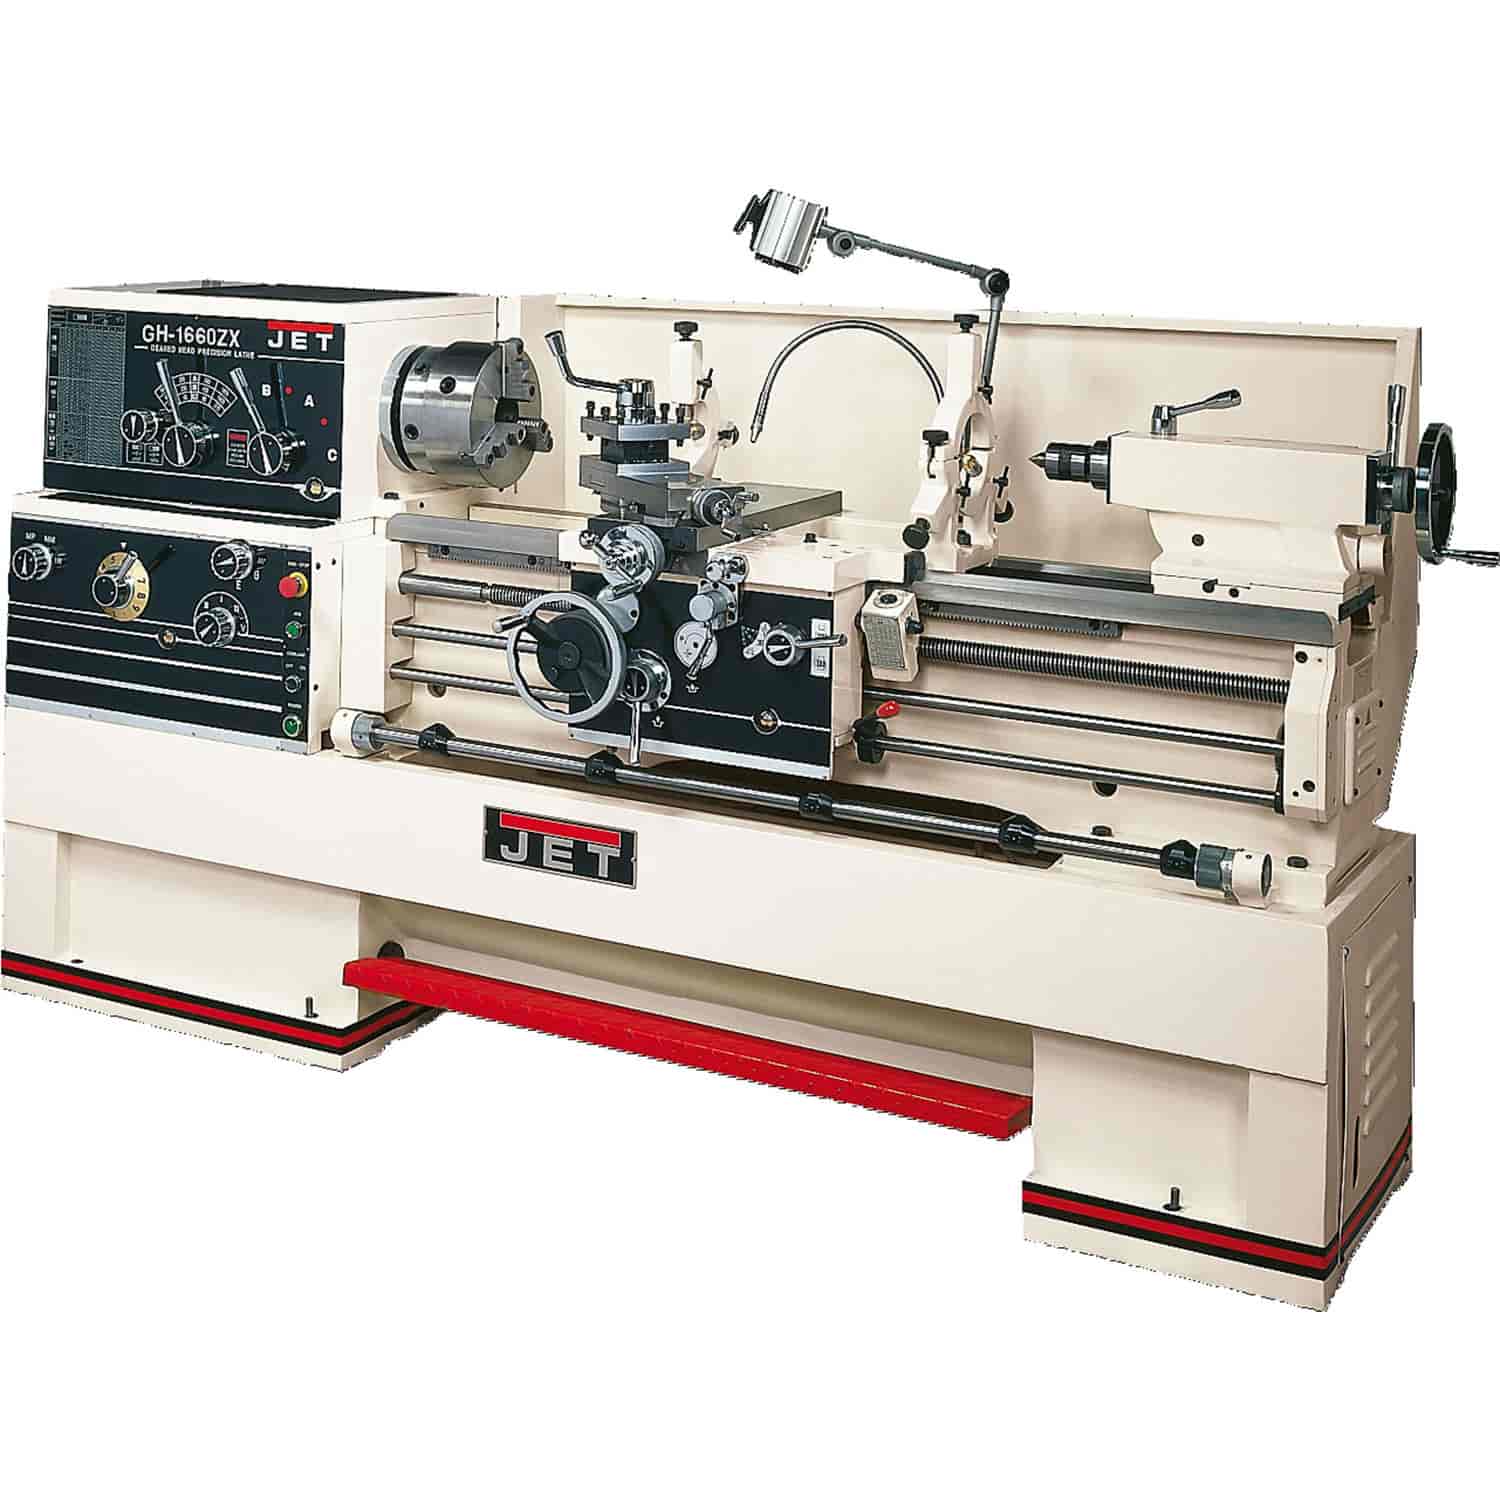 GH-1660ZX 3-1/8 Spindle Bore Geared Head Lathe